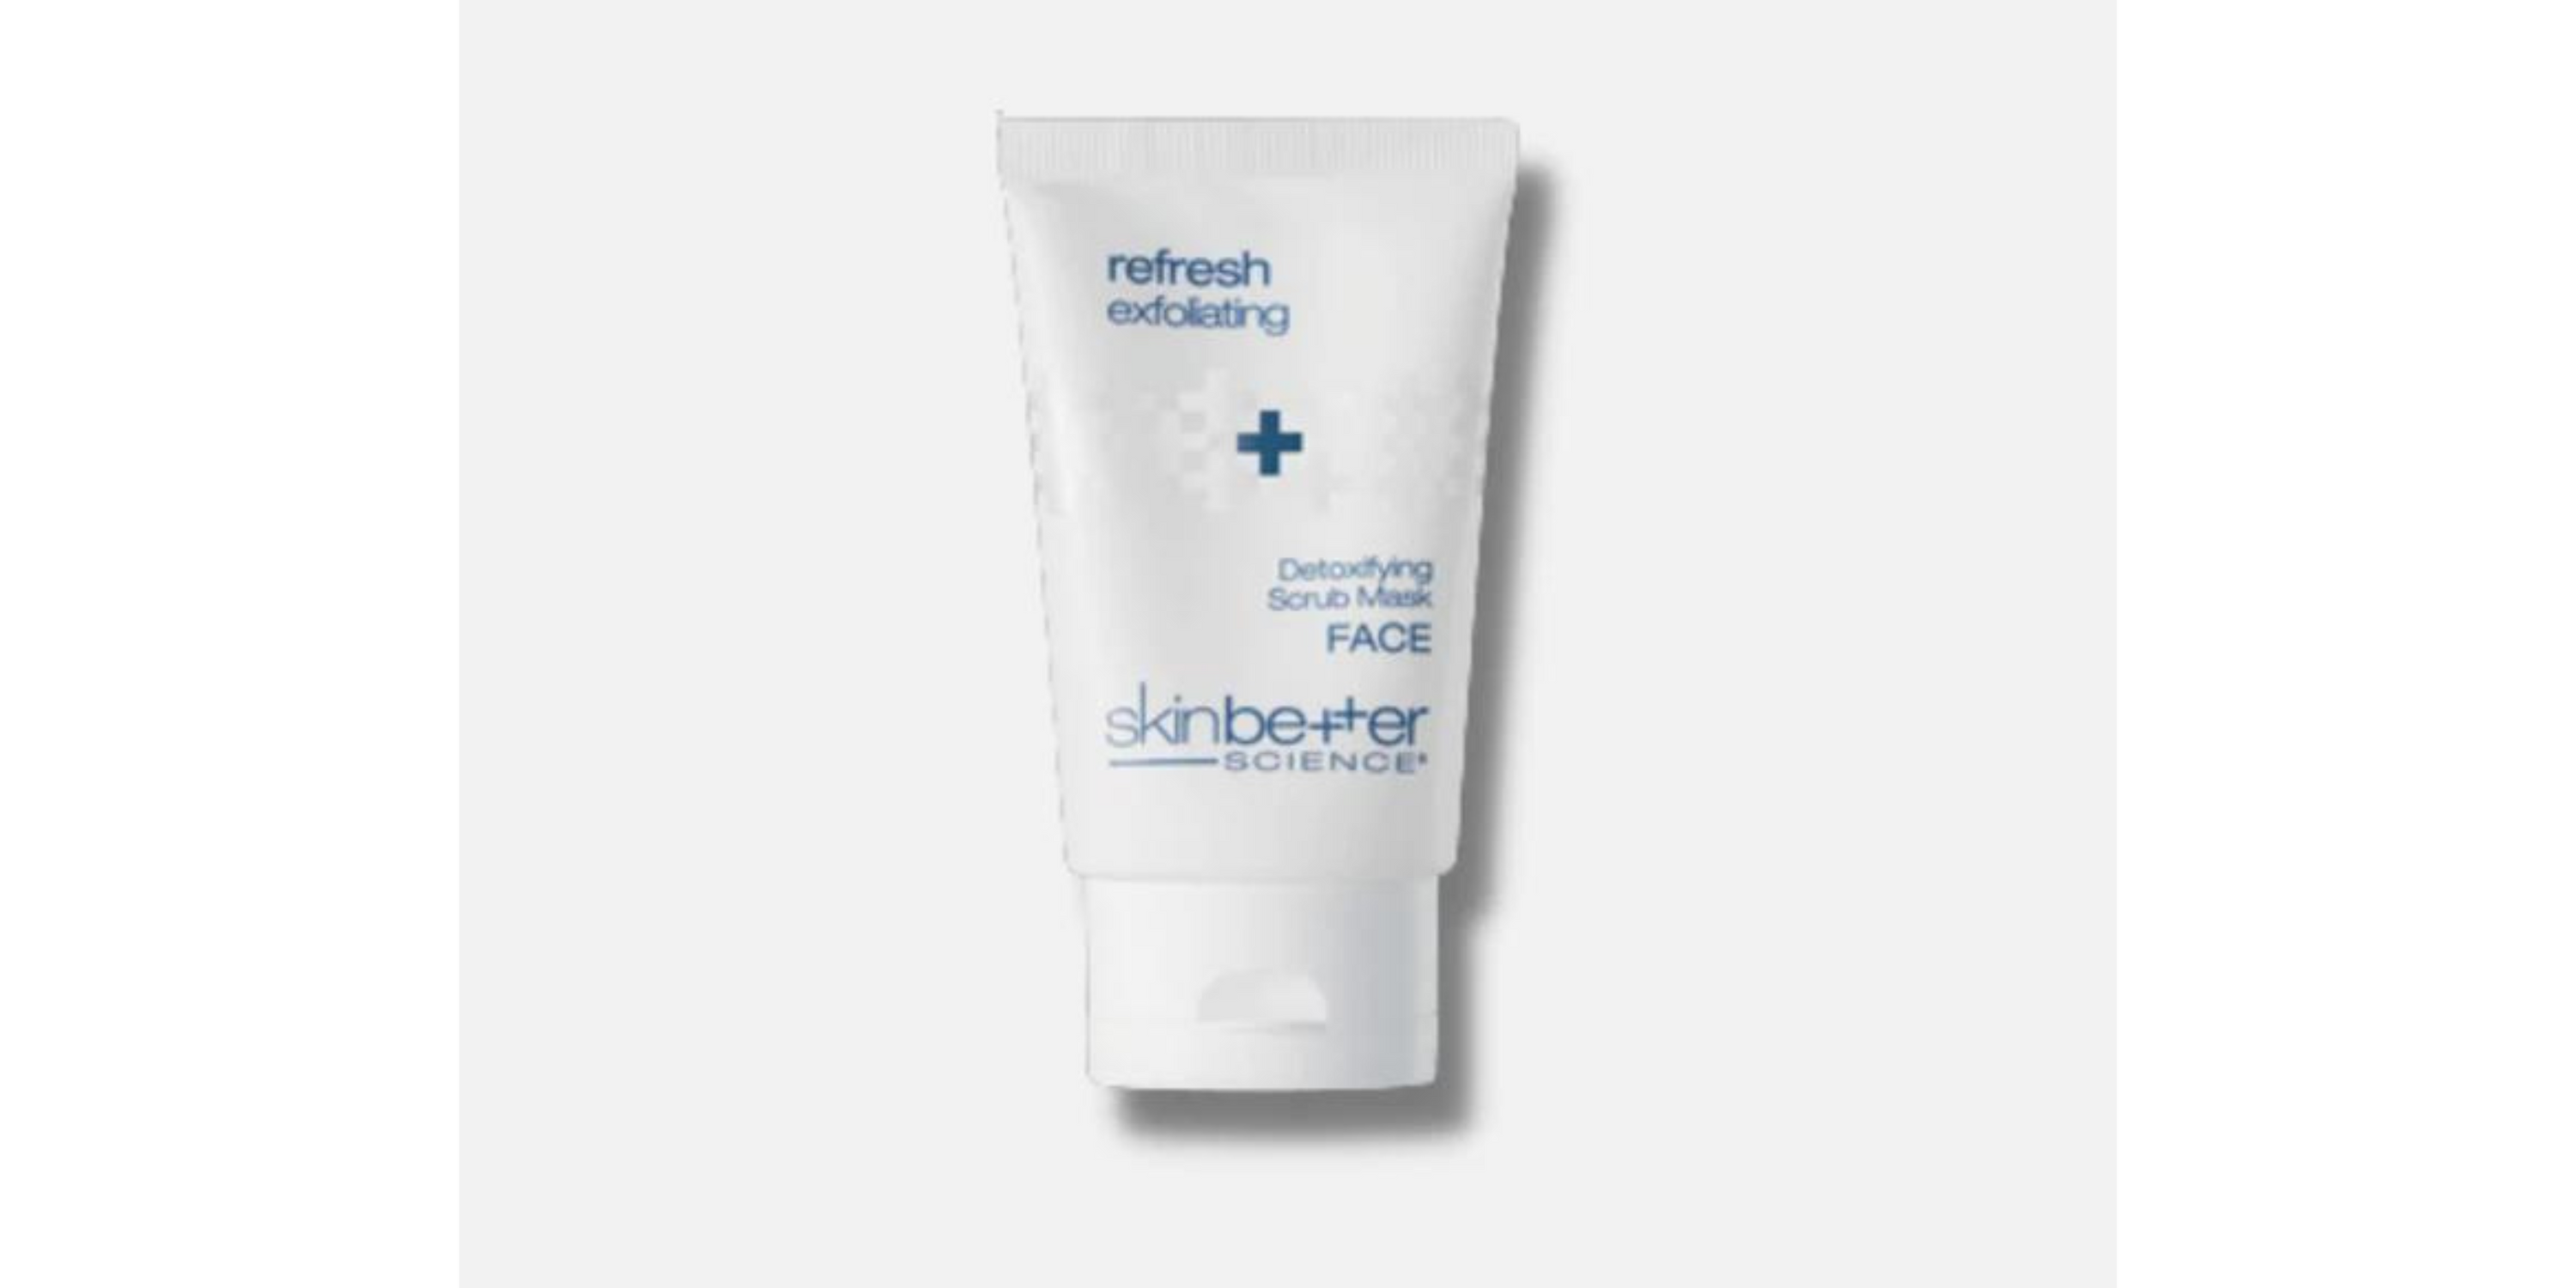 The Pros and Cons of the SKINBETTER SCIENCE Refresh Detoxifying Scrub Mask